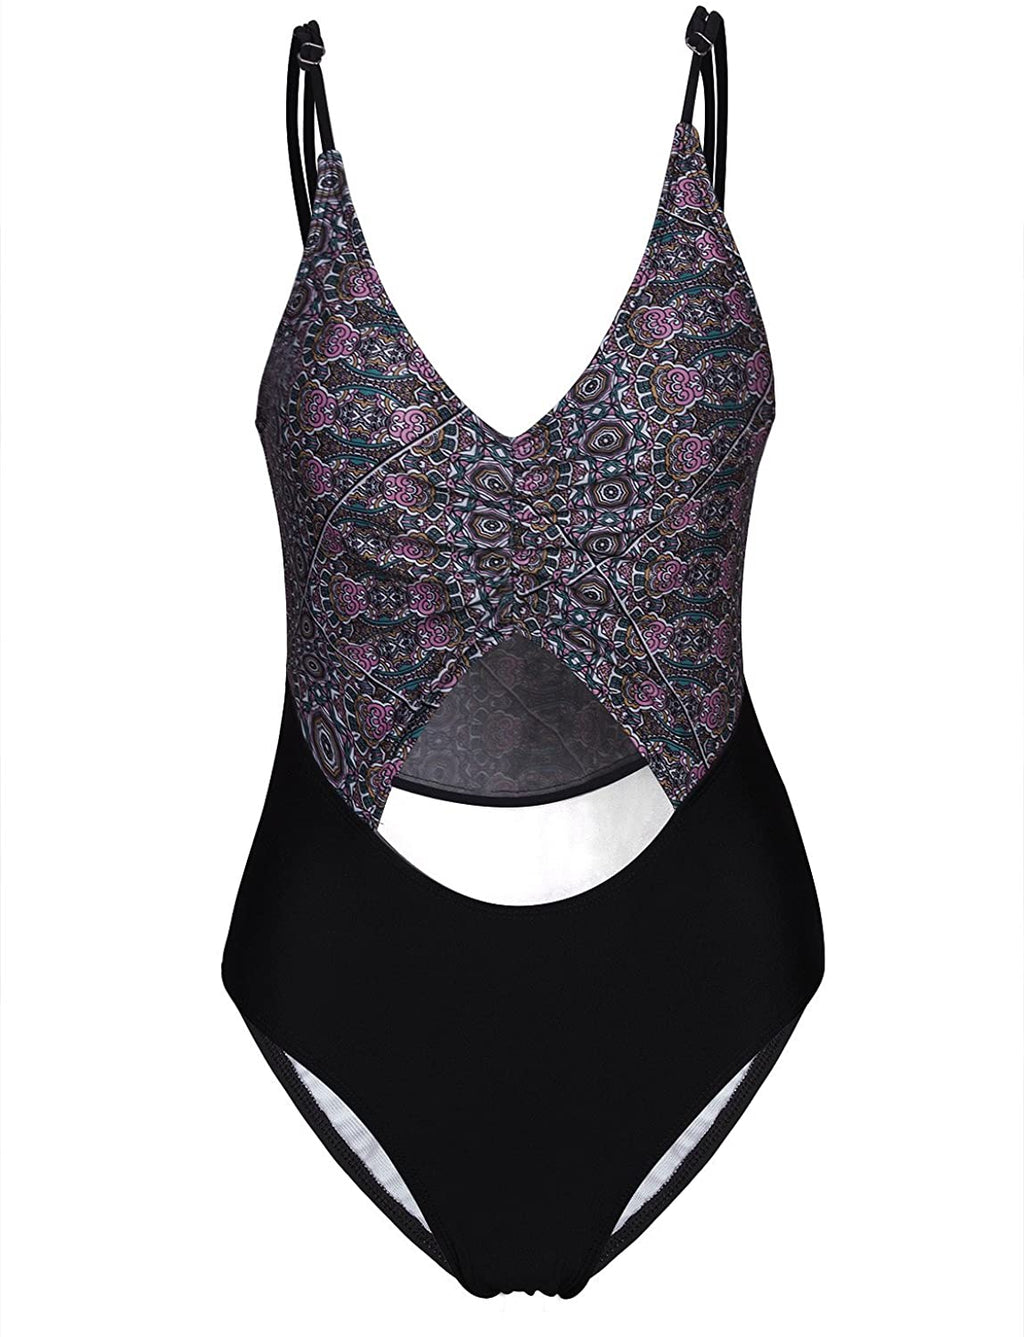 Women's One Piece Swimsuit High Waisted Open Front and Back, Black with patterned waist to top